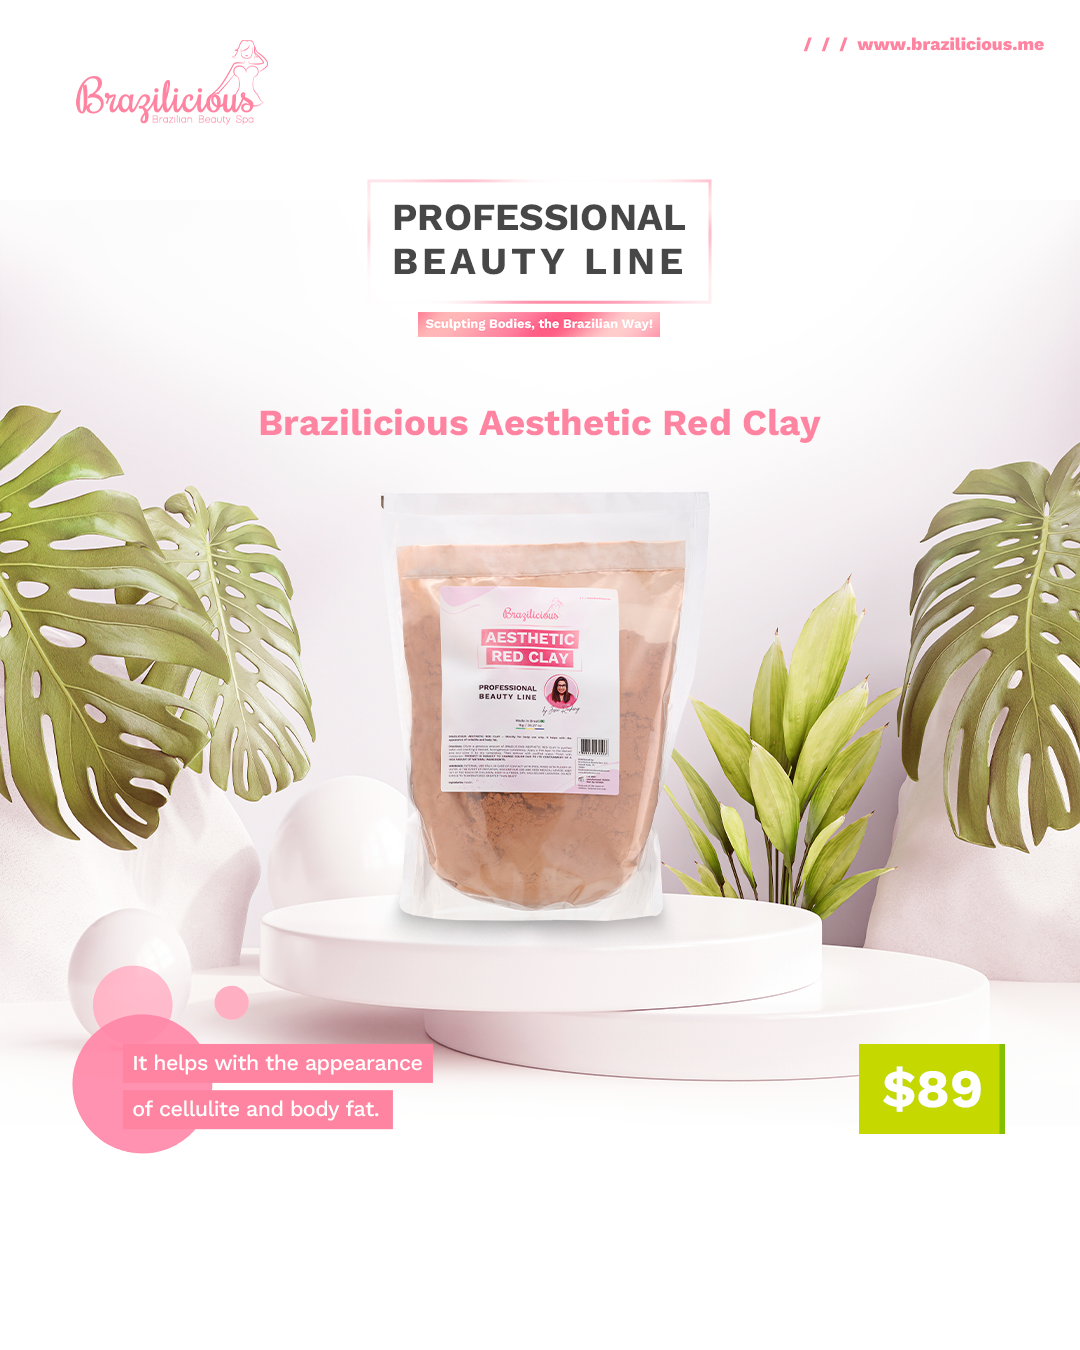 Brazilicious Aesthetic Red Clay